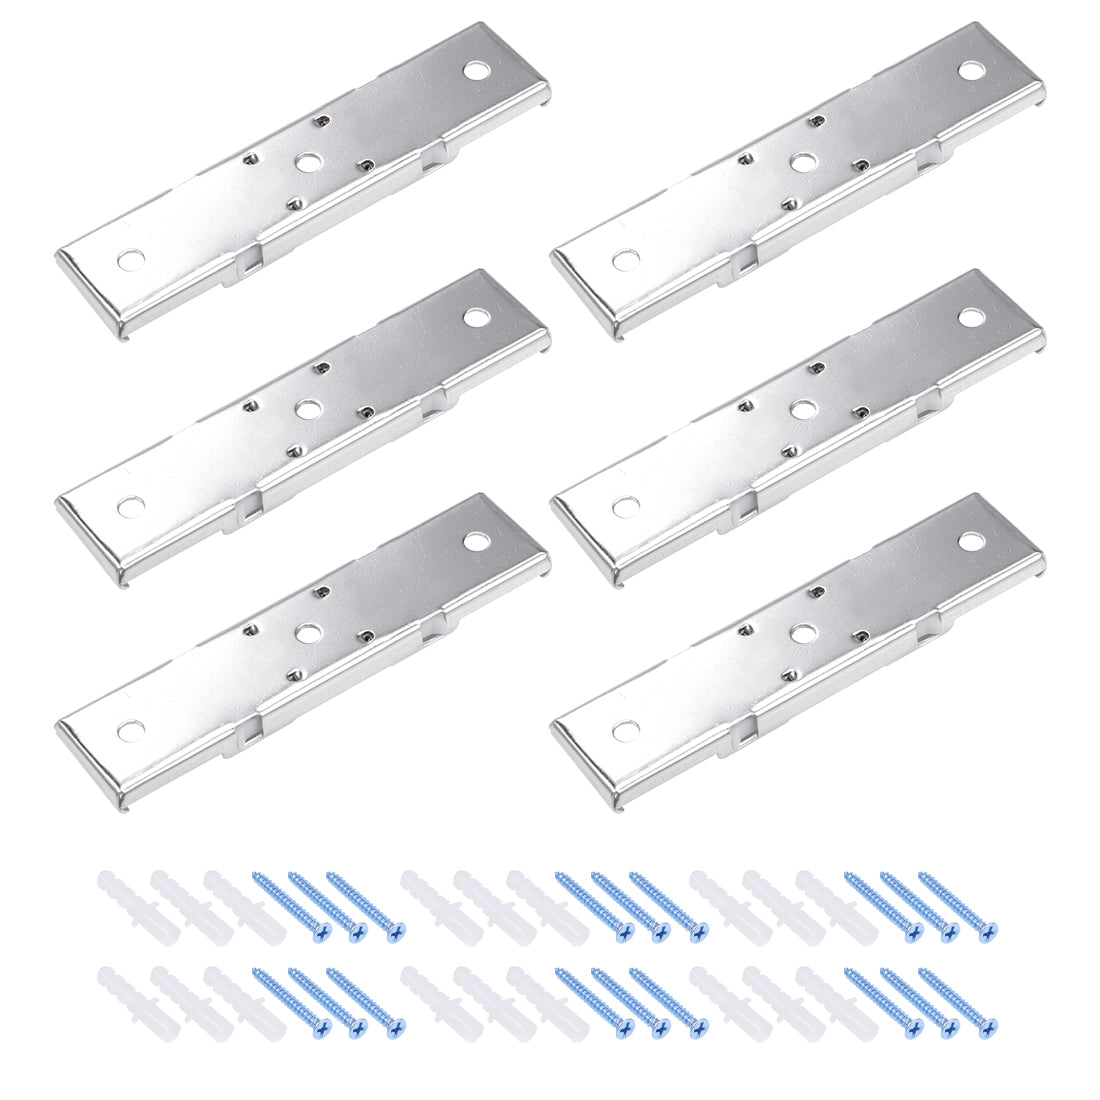 uxcell Uxcell Curtain Rod Bracket Double Stainless Steel Drapery Track Holder for 20mm Rail Top Mounted on Ceiling 6 Pcs